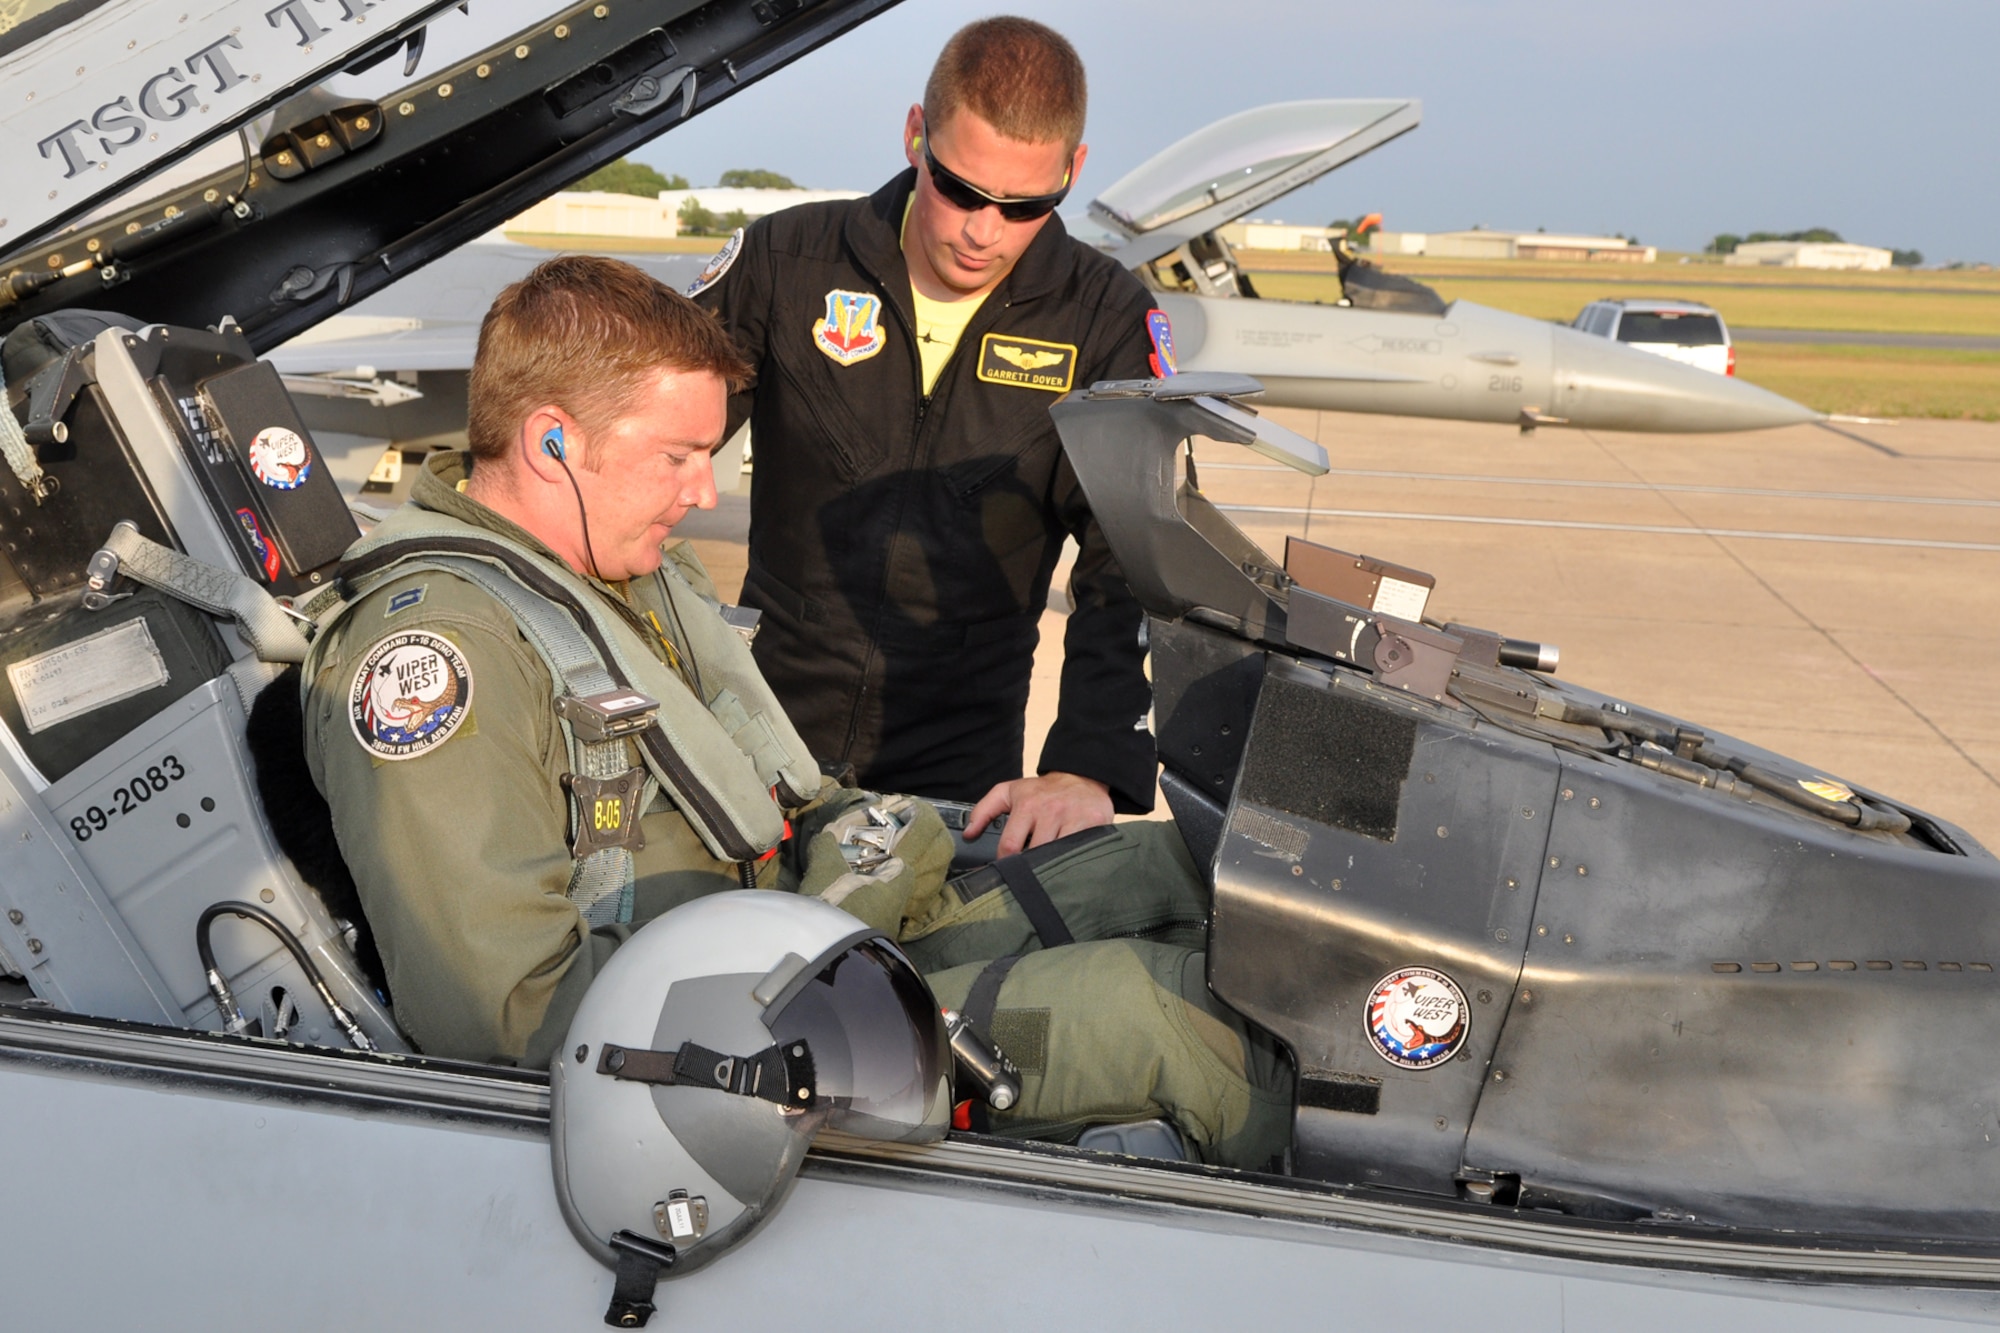 Staff Sgt. Graham Fitzpatrick, crew chief, helps strap in Capt. Garrett Dover, pilot, into an F-16 Fighting Falcon before launching the jet to participate in the Cedar Creek Lake Air Show, “Thunder Over Cedar Creek Lake,” near Mabank, Texas, July 2, 2011. The jet was launched from Tyler Pounds Regional Airport in Tyler, Texas. Both Airmen are assigned to the Viper West F-16 Demonstration Team, 388th Fighter Wing, Hill Air Force Base, Utah. (U.S. Air Force photo/Tech. Sgt. Jeff Walston) 